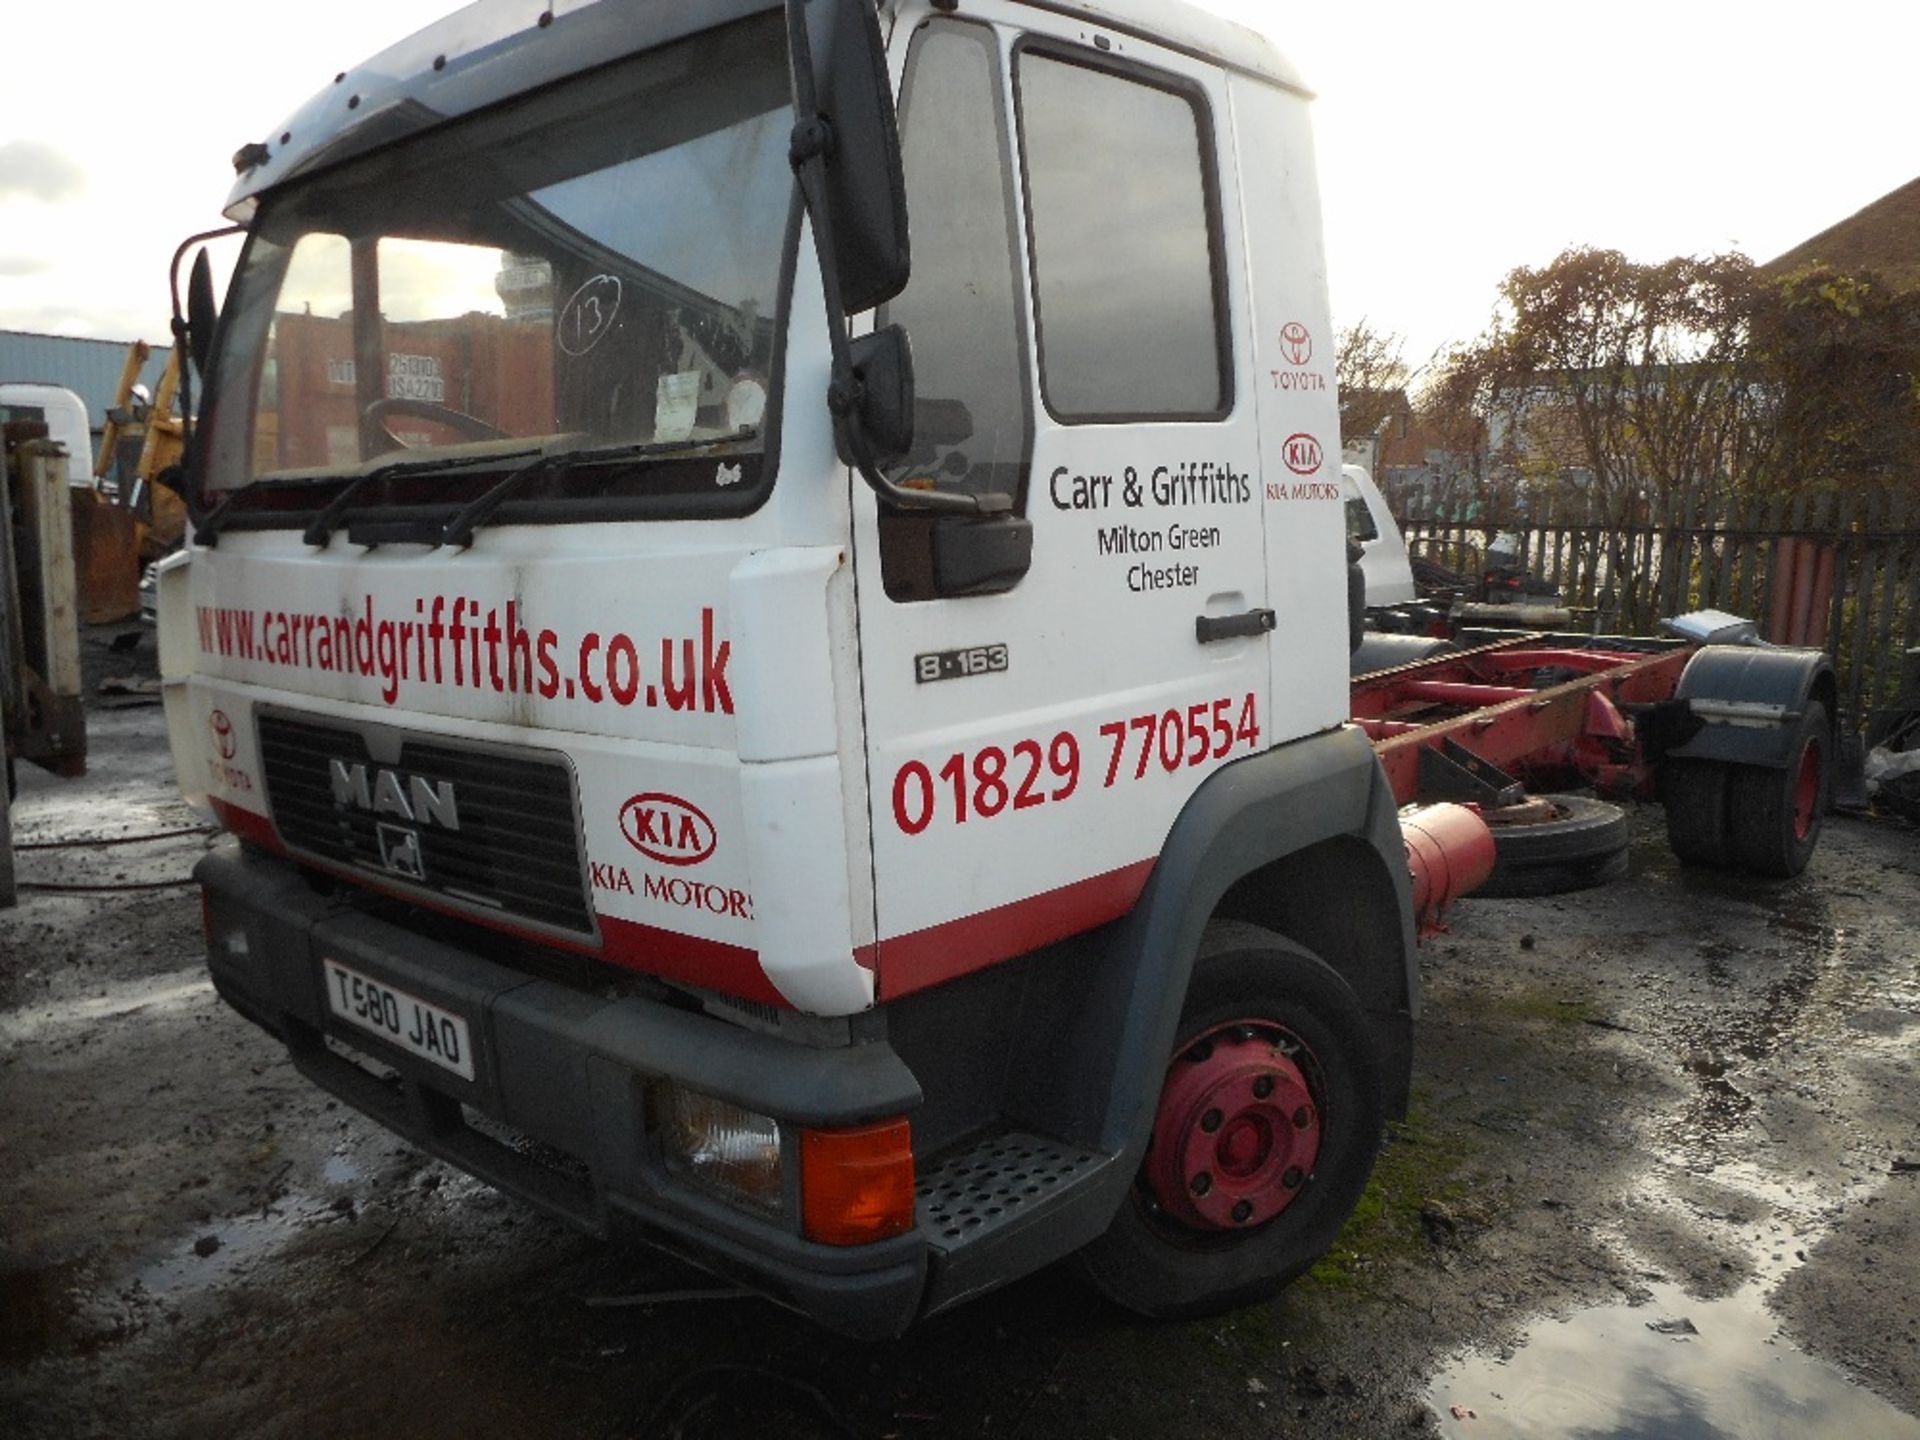 MAN 8.163 7500kg rated chassis cab. Supplied with V5 no test.